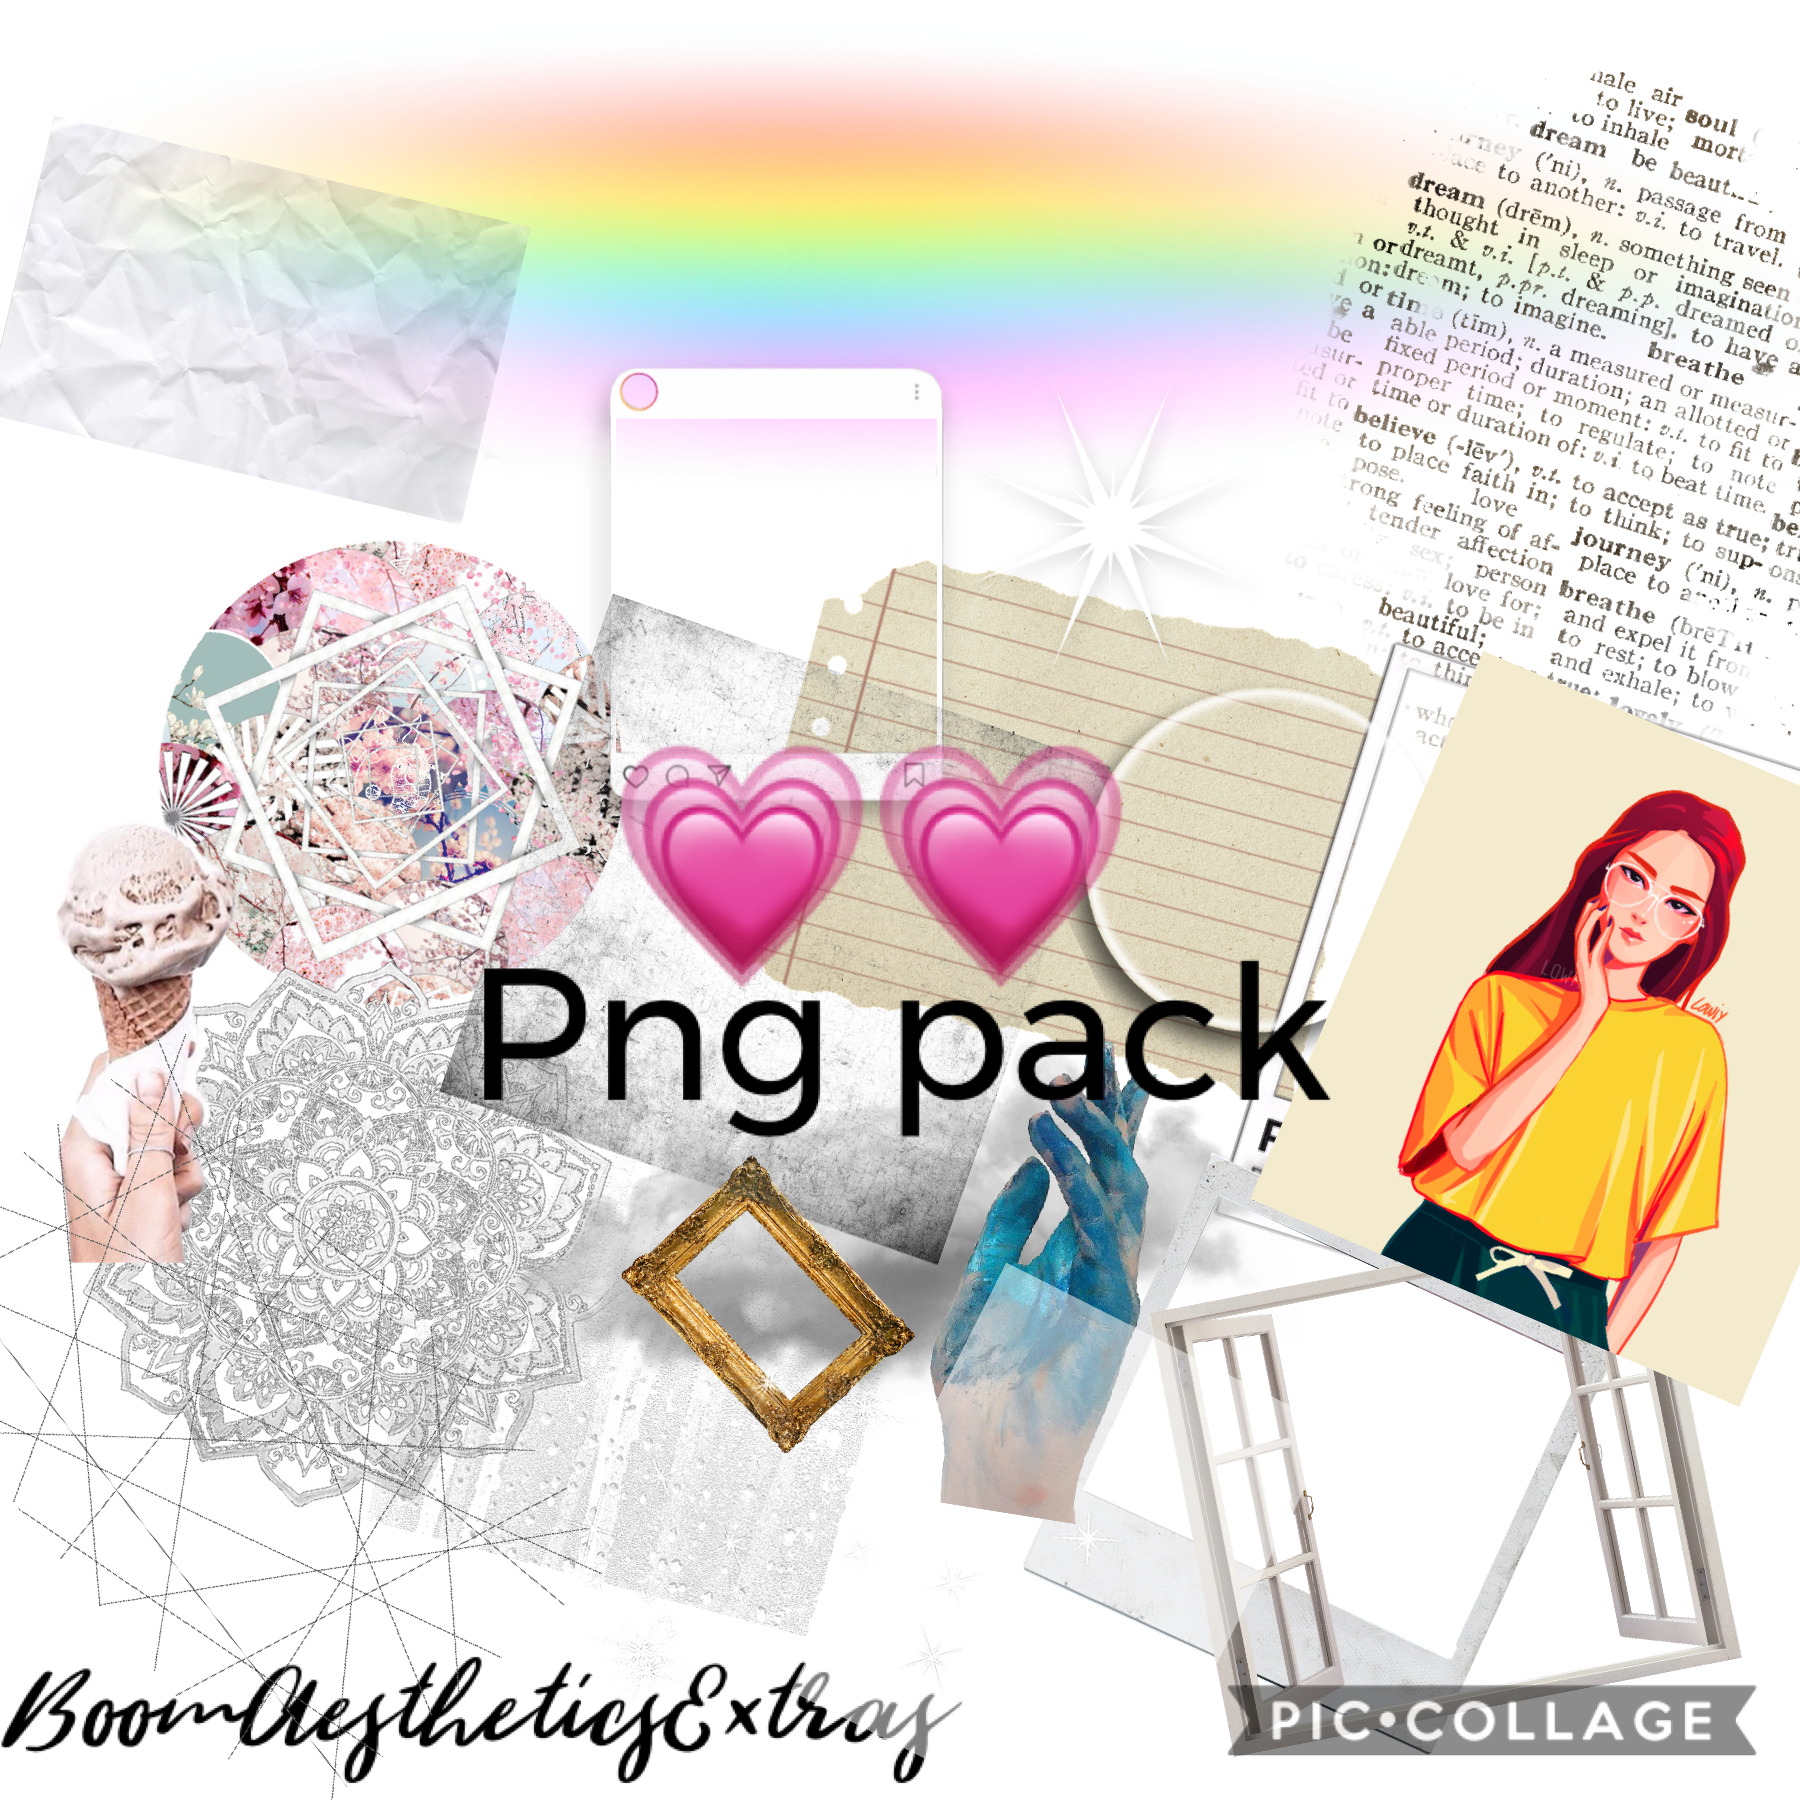 Png pack 😘😘